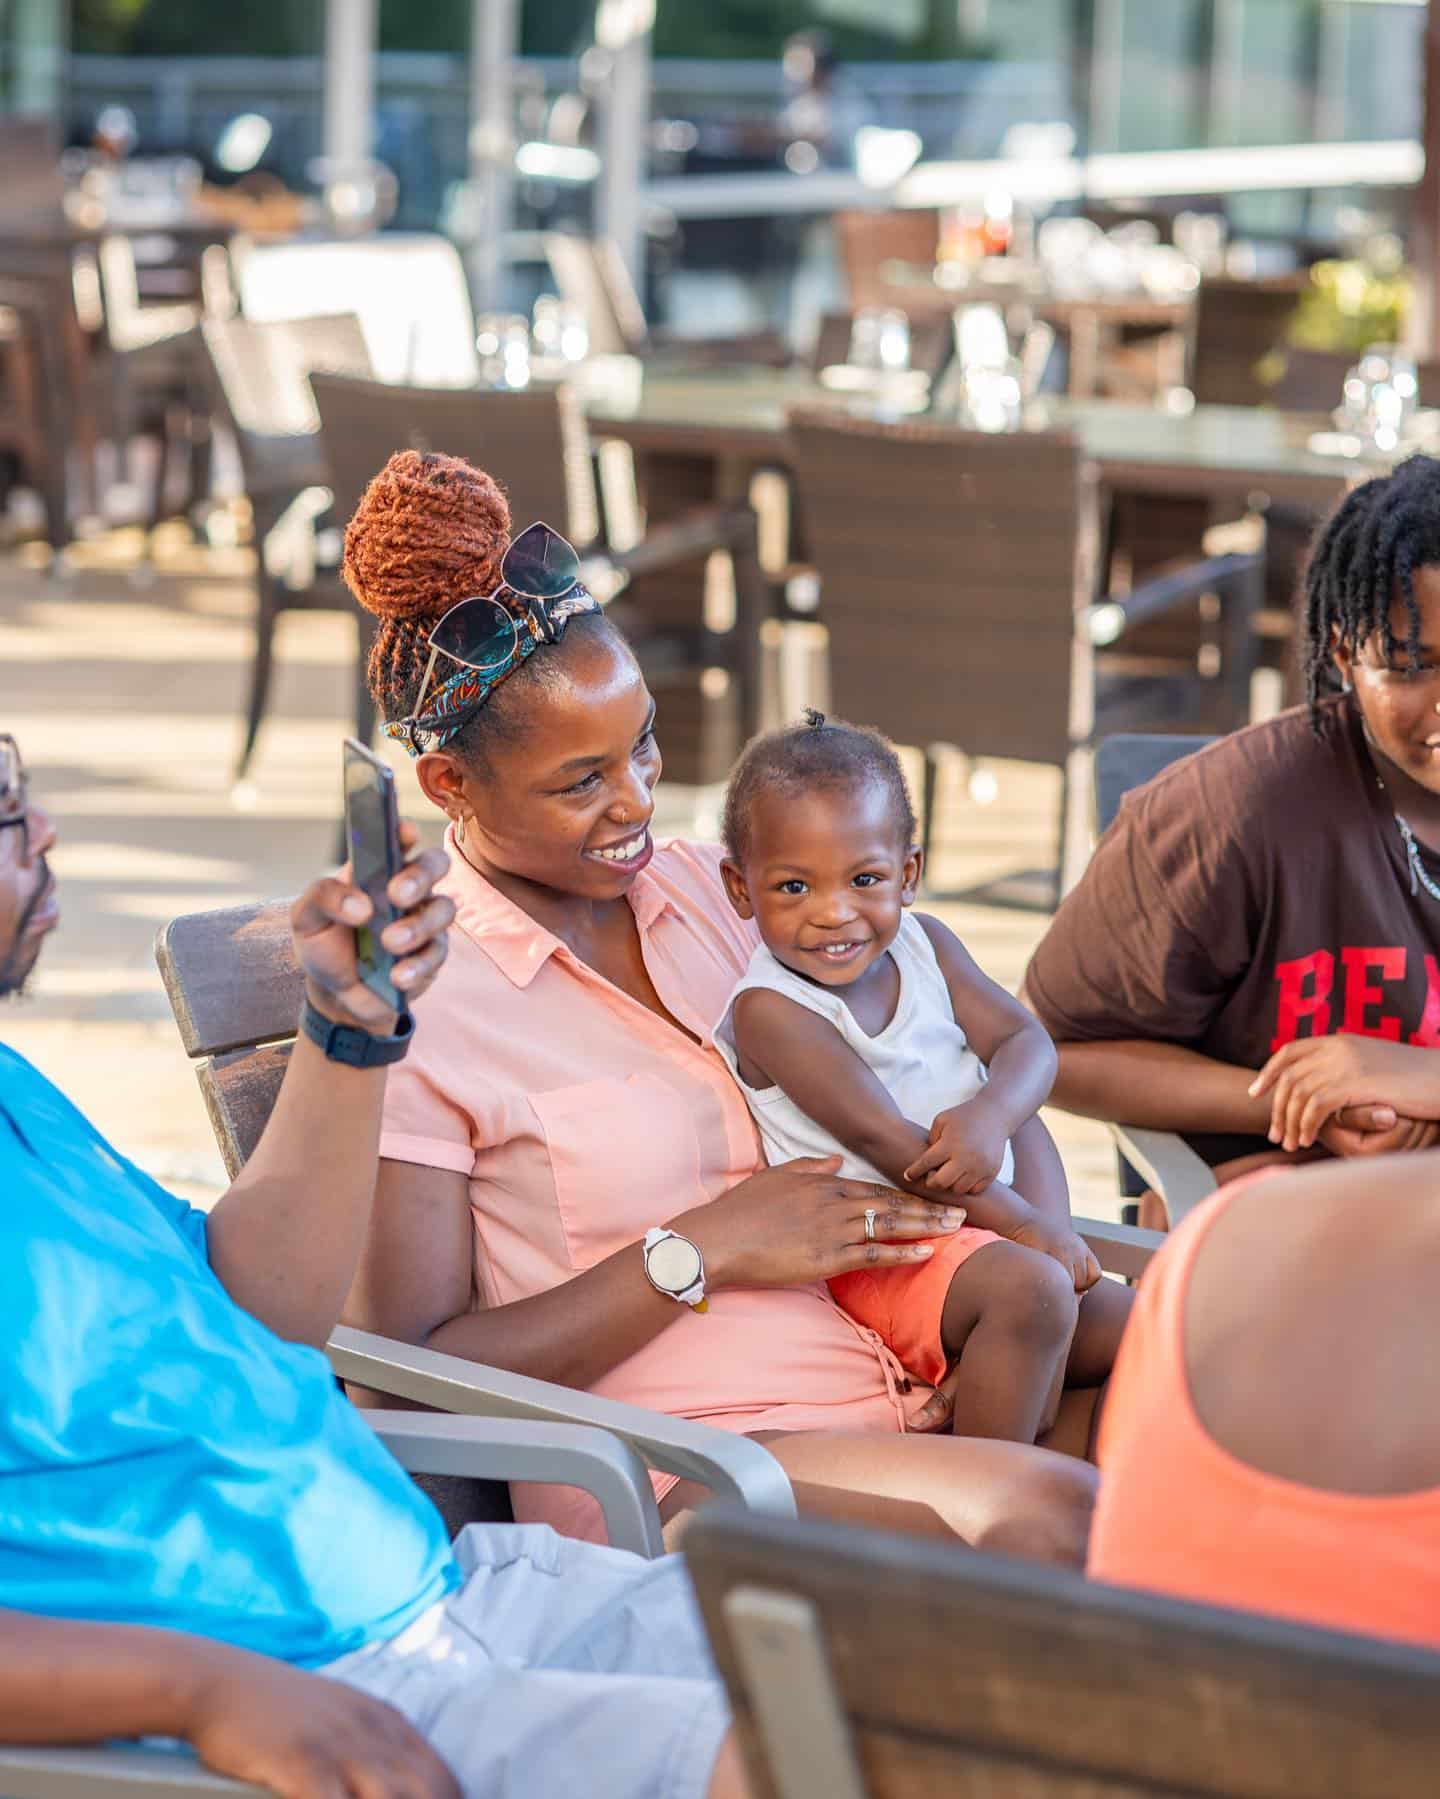 It's the  family  for us! Folks can't help but smile big when hanging out at Metropolitan. Bring the fam and come hang for Music at the Met tonight from 6-9 p.m.